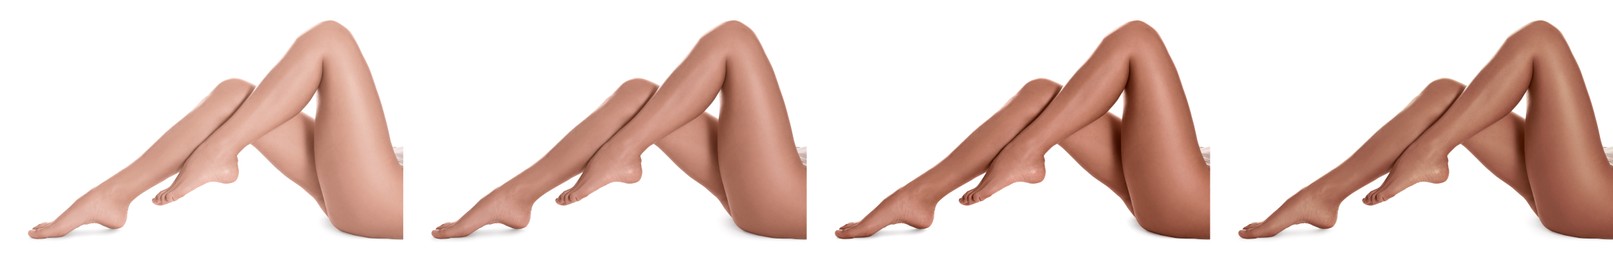 Image of Woman with beautiful legs on white background, closeup. Collage of photos showing stages of suntanning